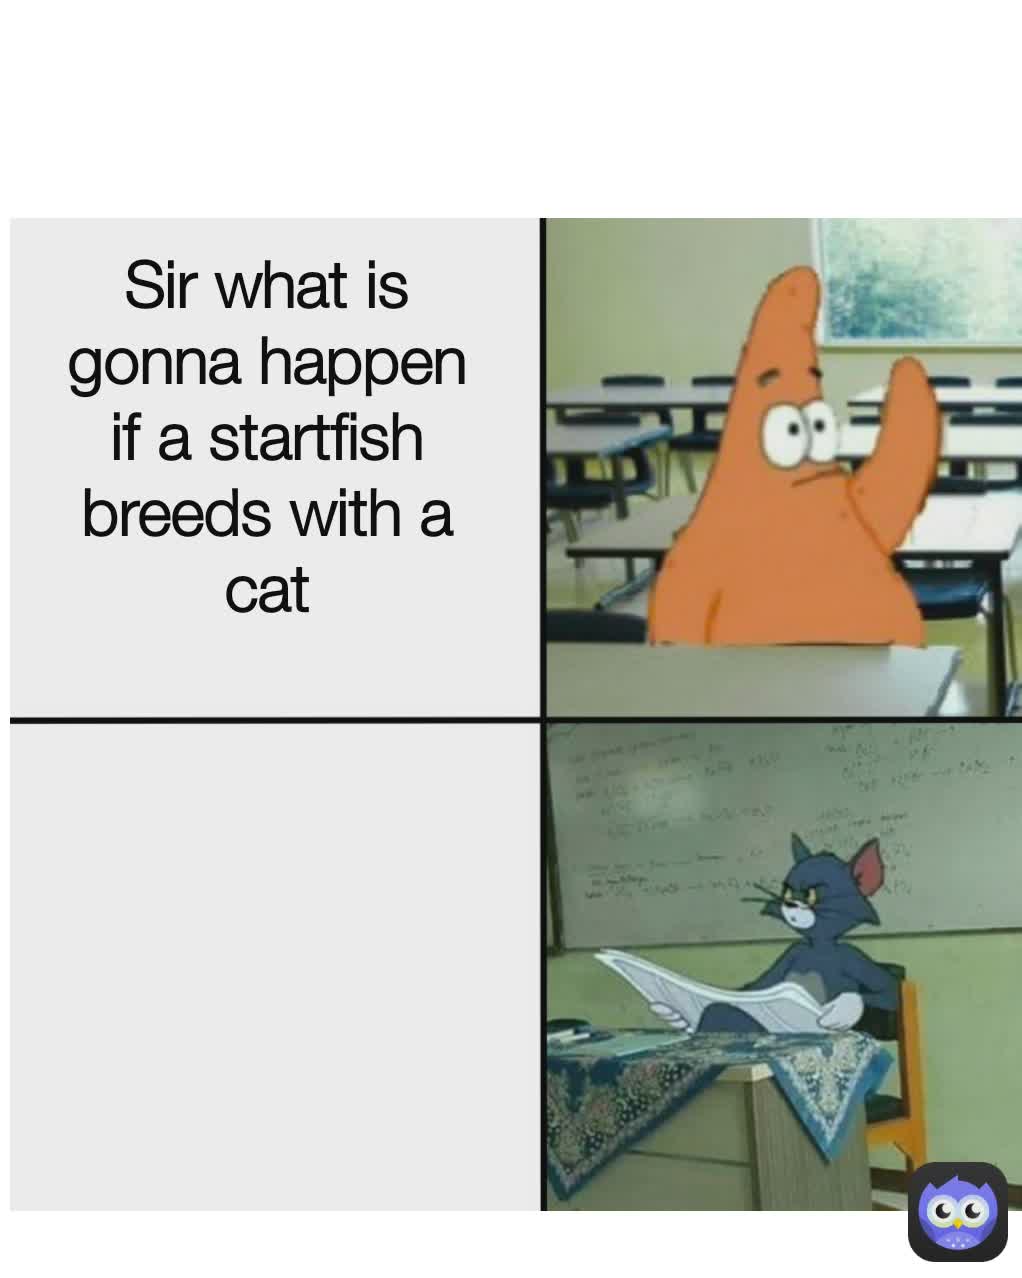 Sir what is gonna happen if a startfish breeds with a cat